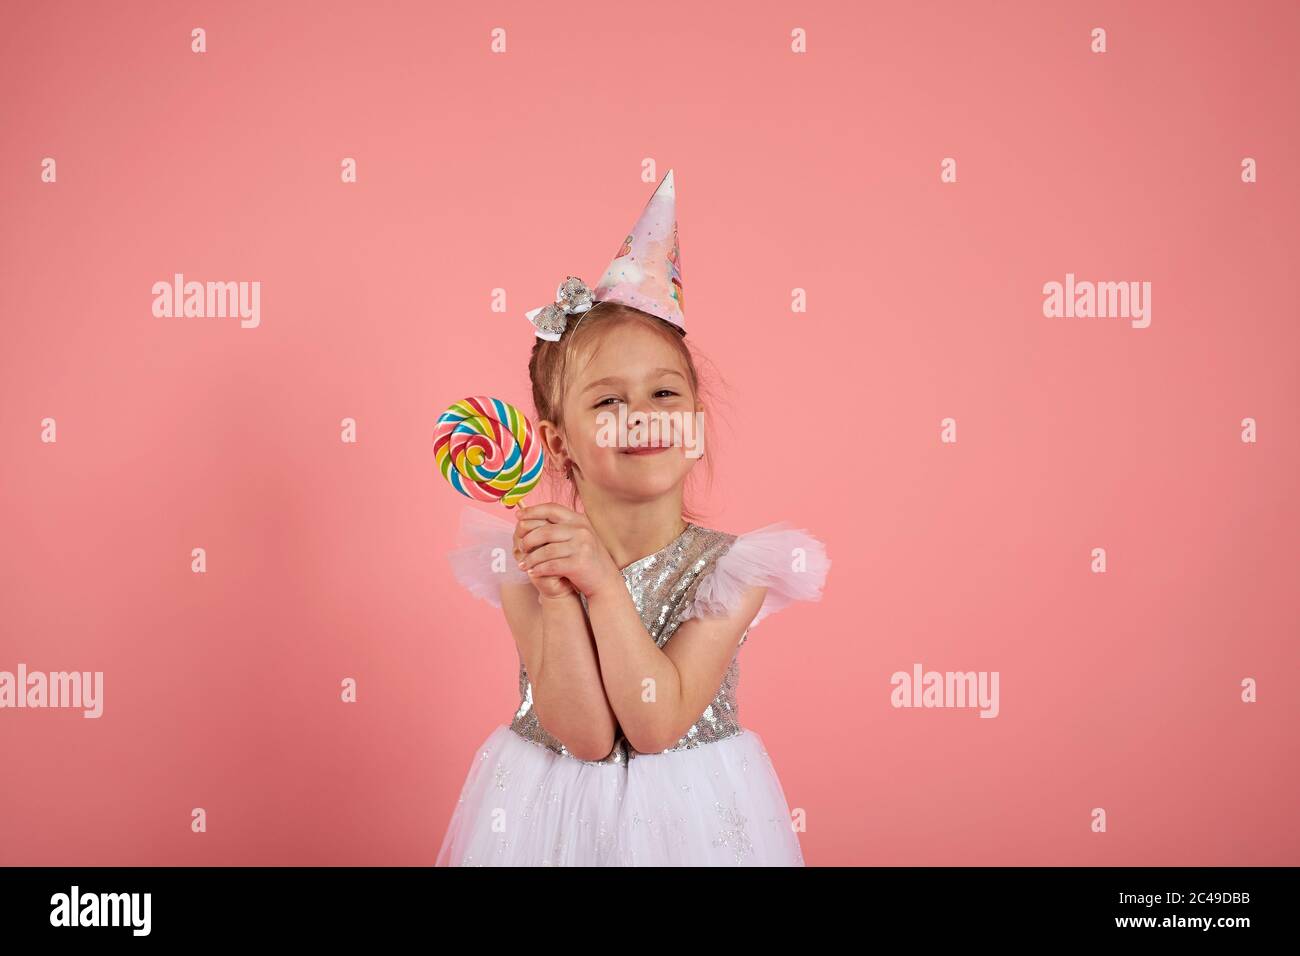 Happy smiling child with tasty lollipop having fun over pink background Stock Photo